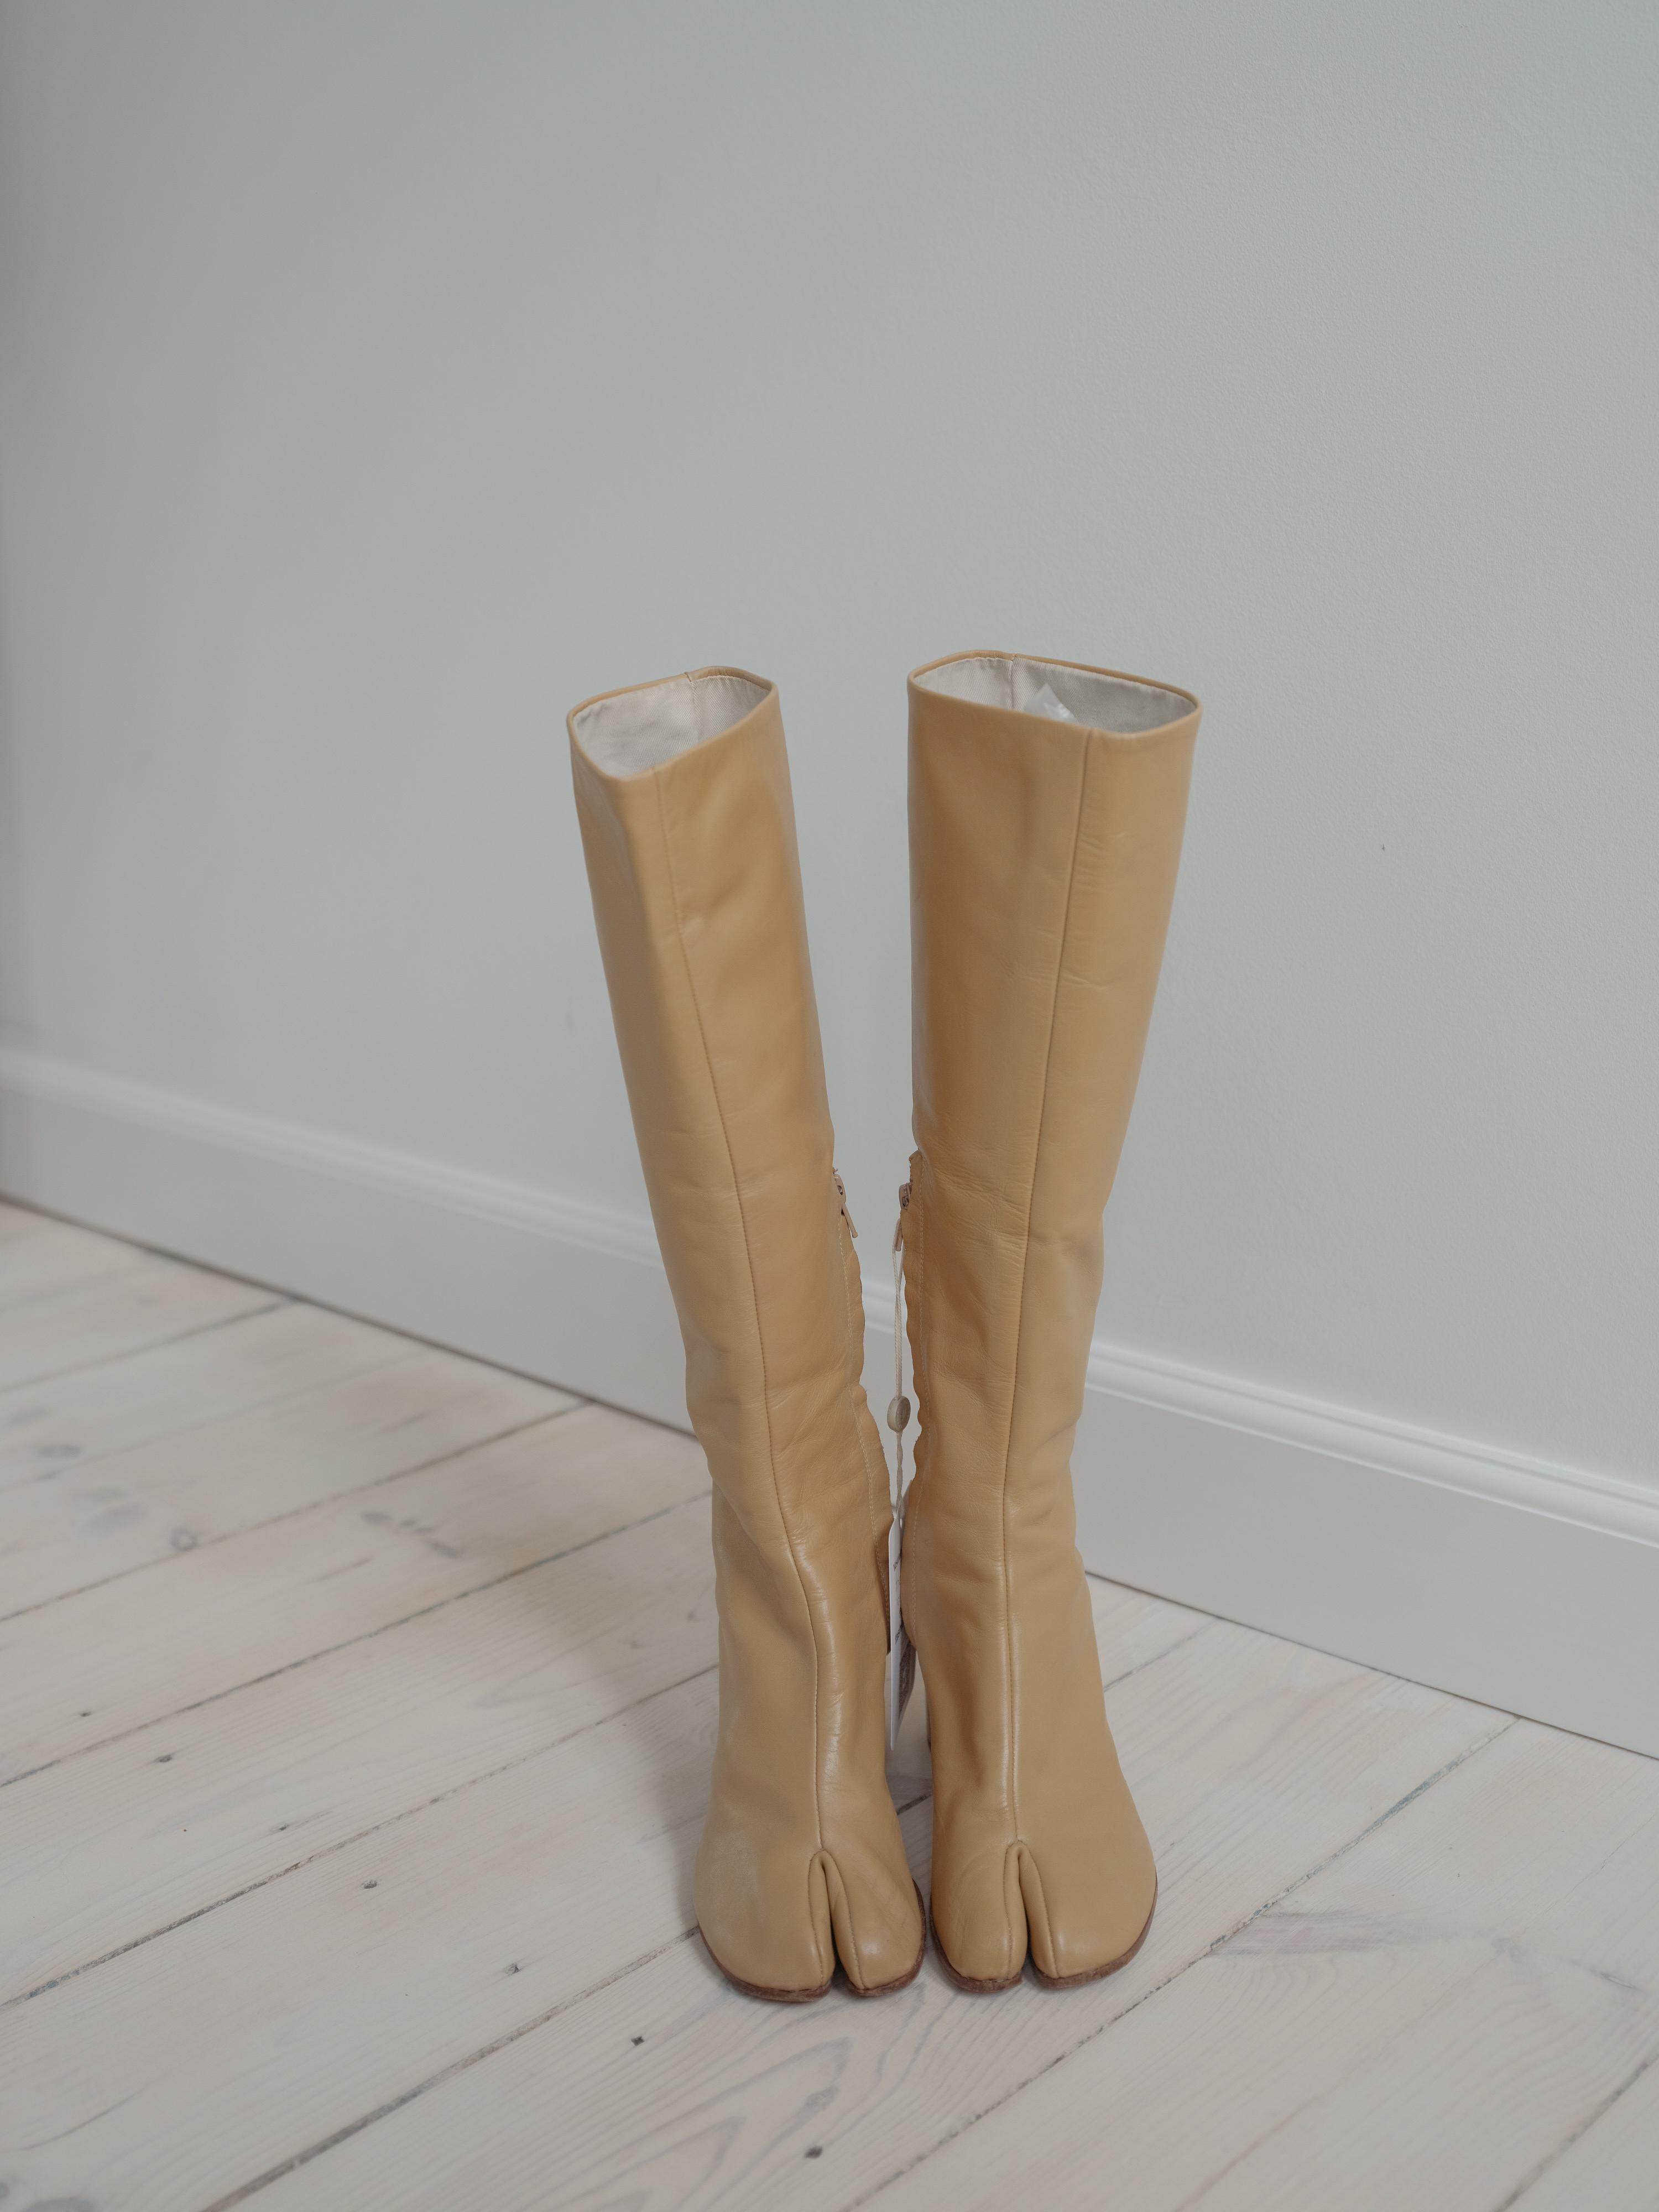 Margiela Tabi Knee High Boots 2004 look book collection  Beige  Leather  EU 38  For Sale 4